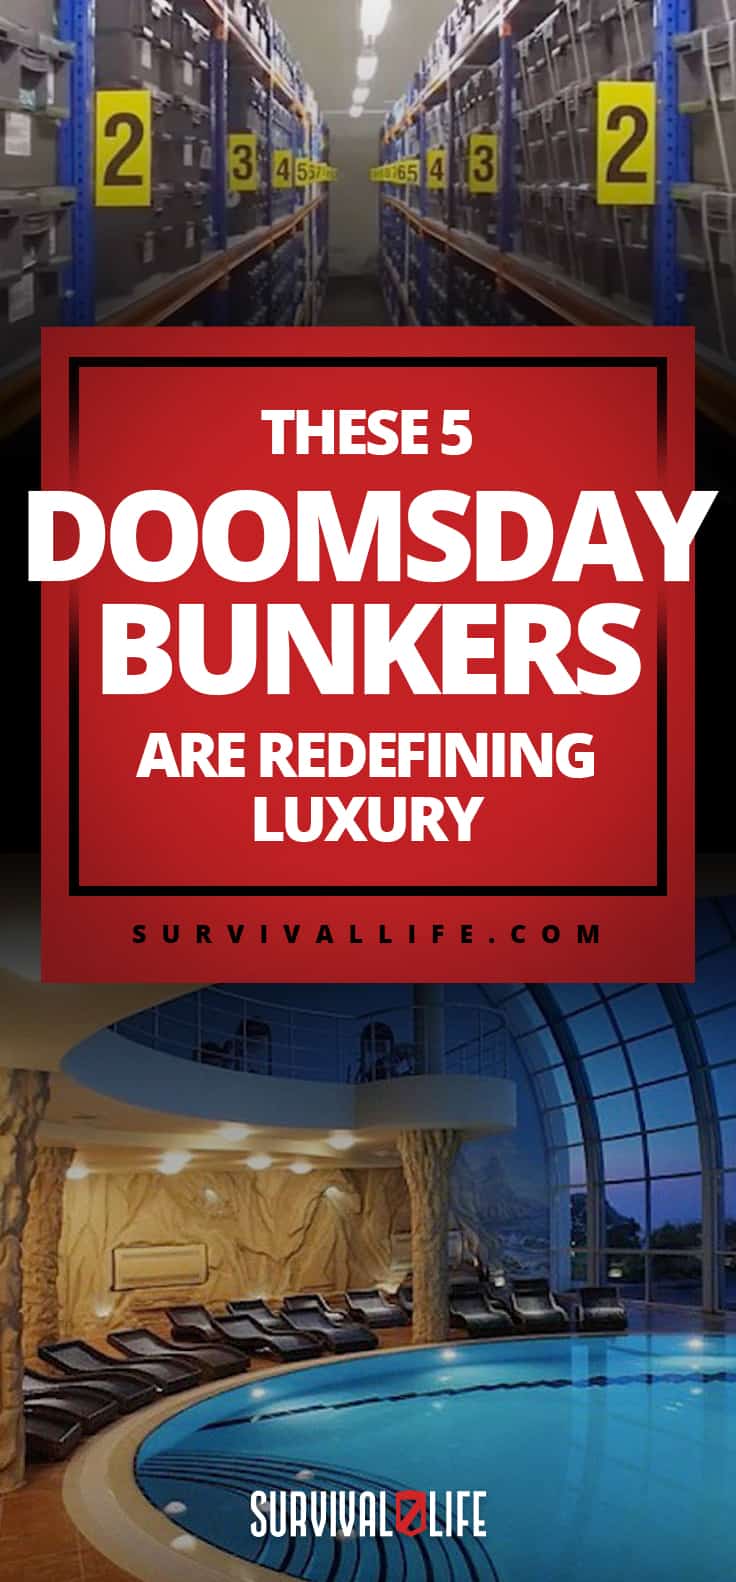 These 5 Doomsday Bunkers are Redefining Luxury